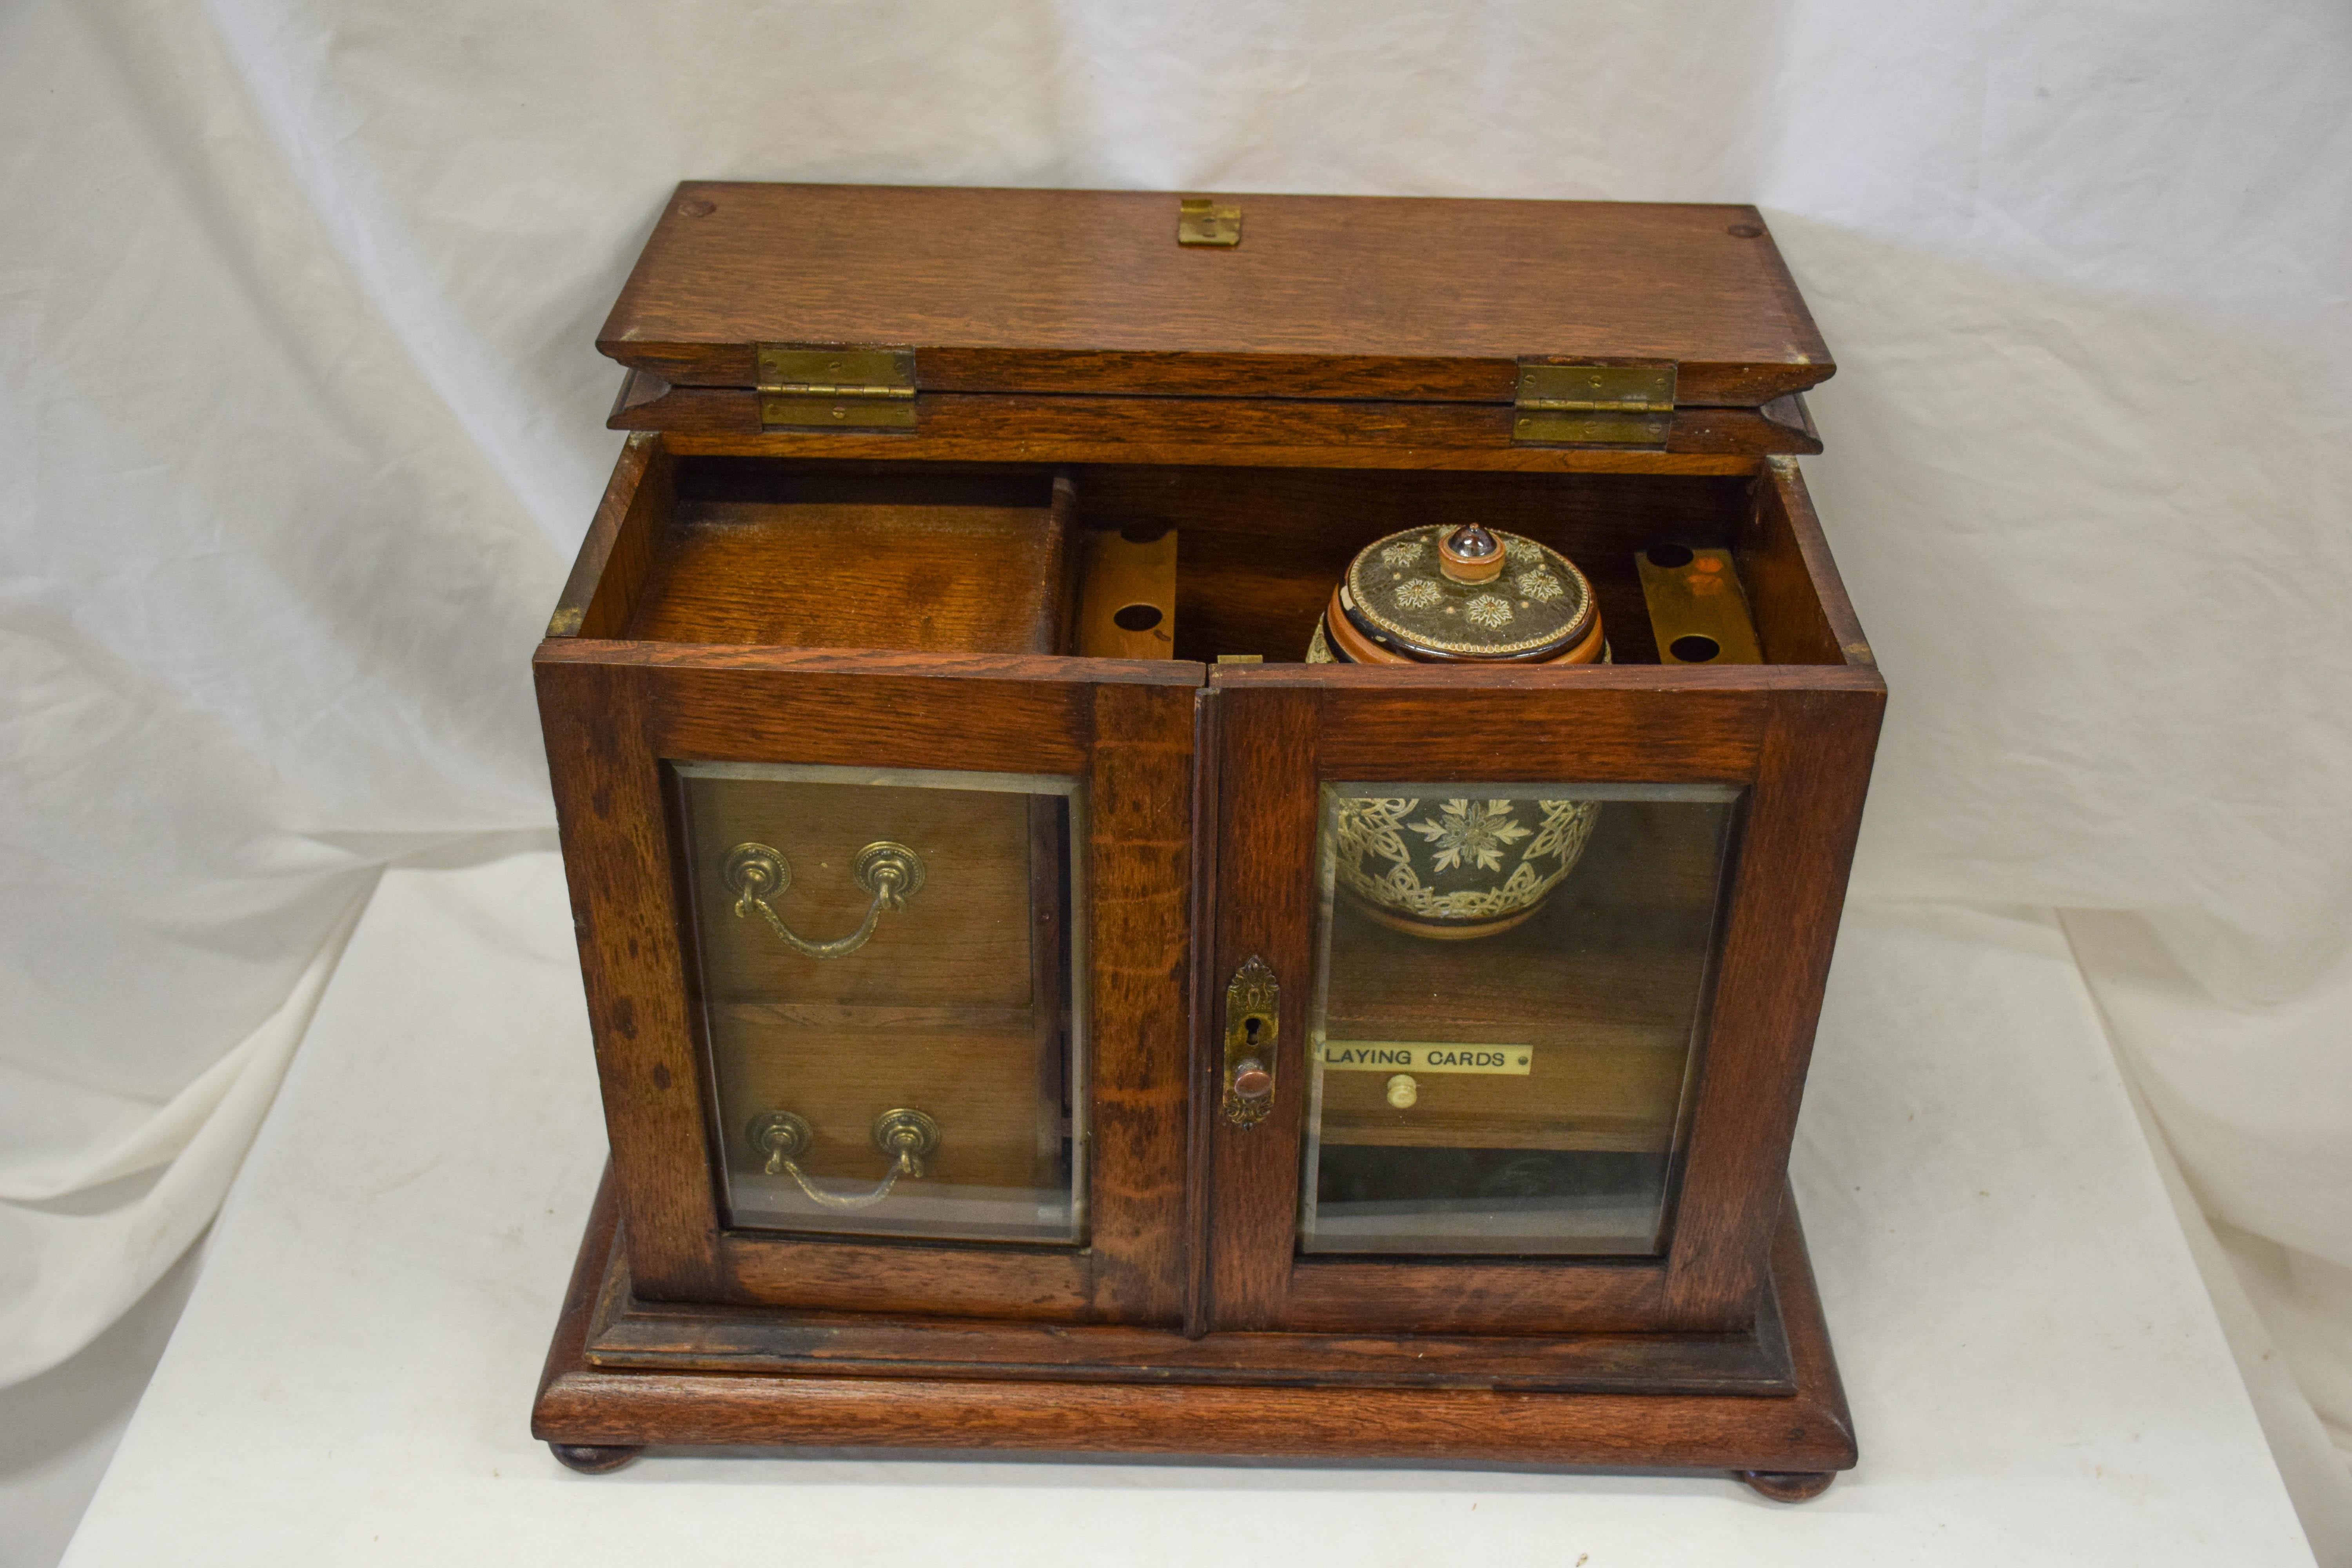 Antique English Gentleman's box with a decorative lidded jar for tobacco and a small drawer for playing cards. So handsome to be used as an accessory in an office or bar. Or simply a lovely decoration on a bookshelf.
Measures: 9 1/2